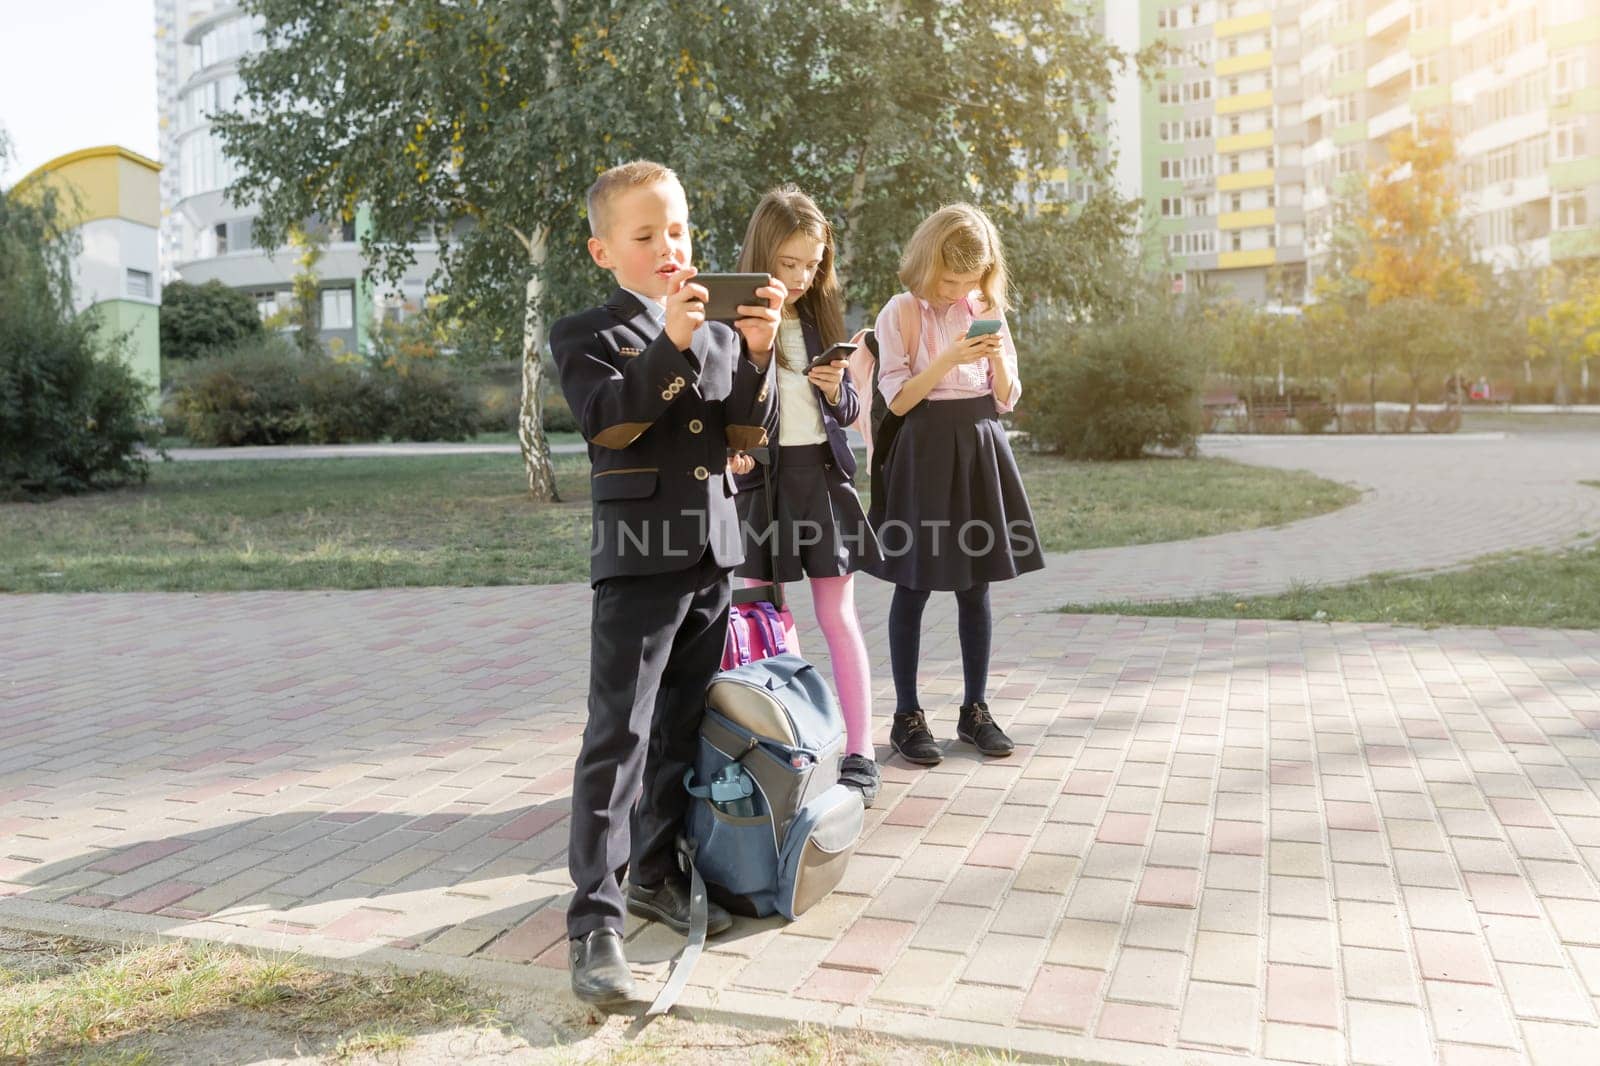 Children of elementary age with smartphones, backpacks, outdoor background. by VH-studio